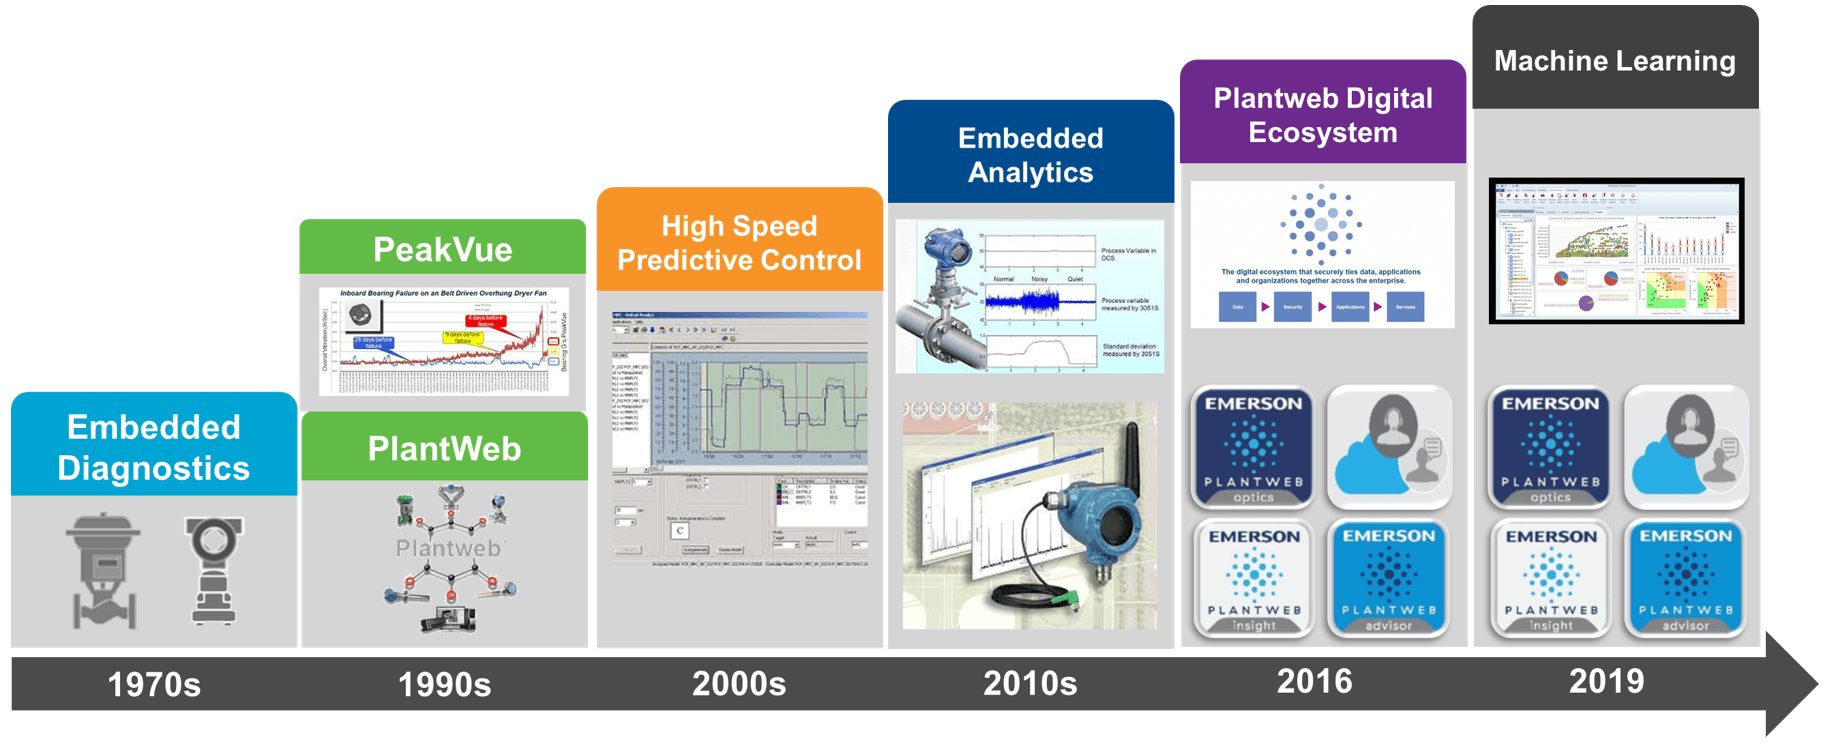 Long history of Emerson operational analytics applications